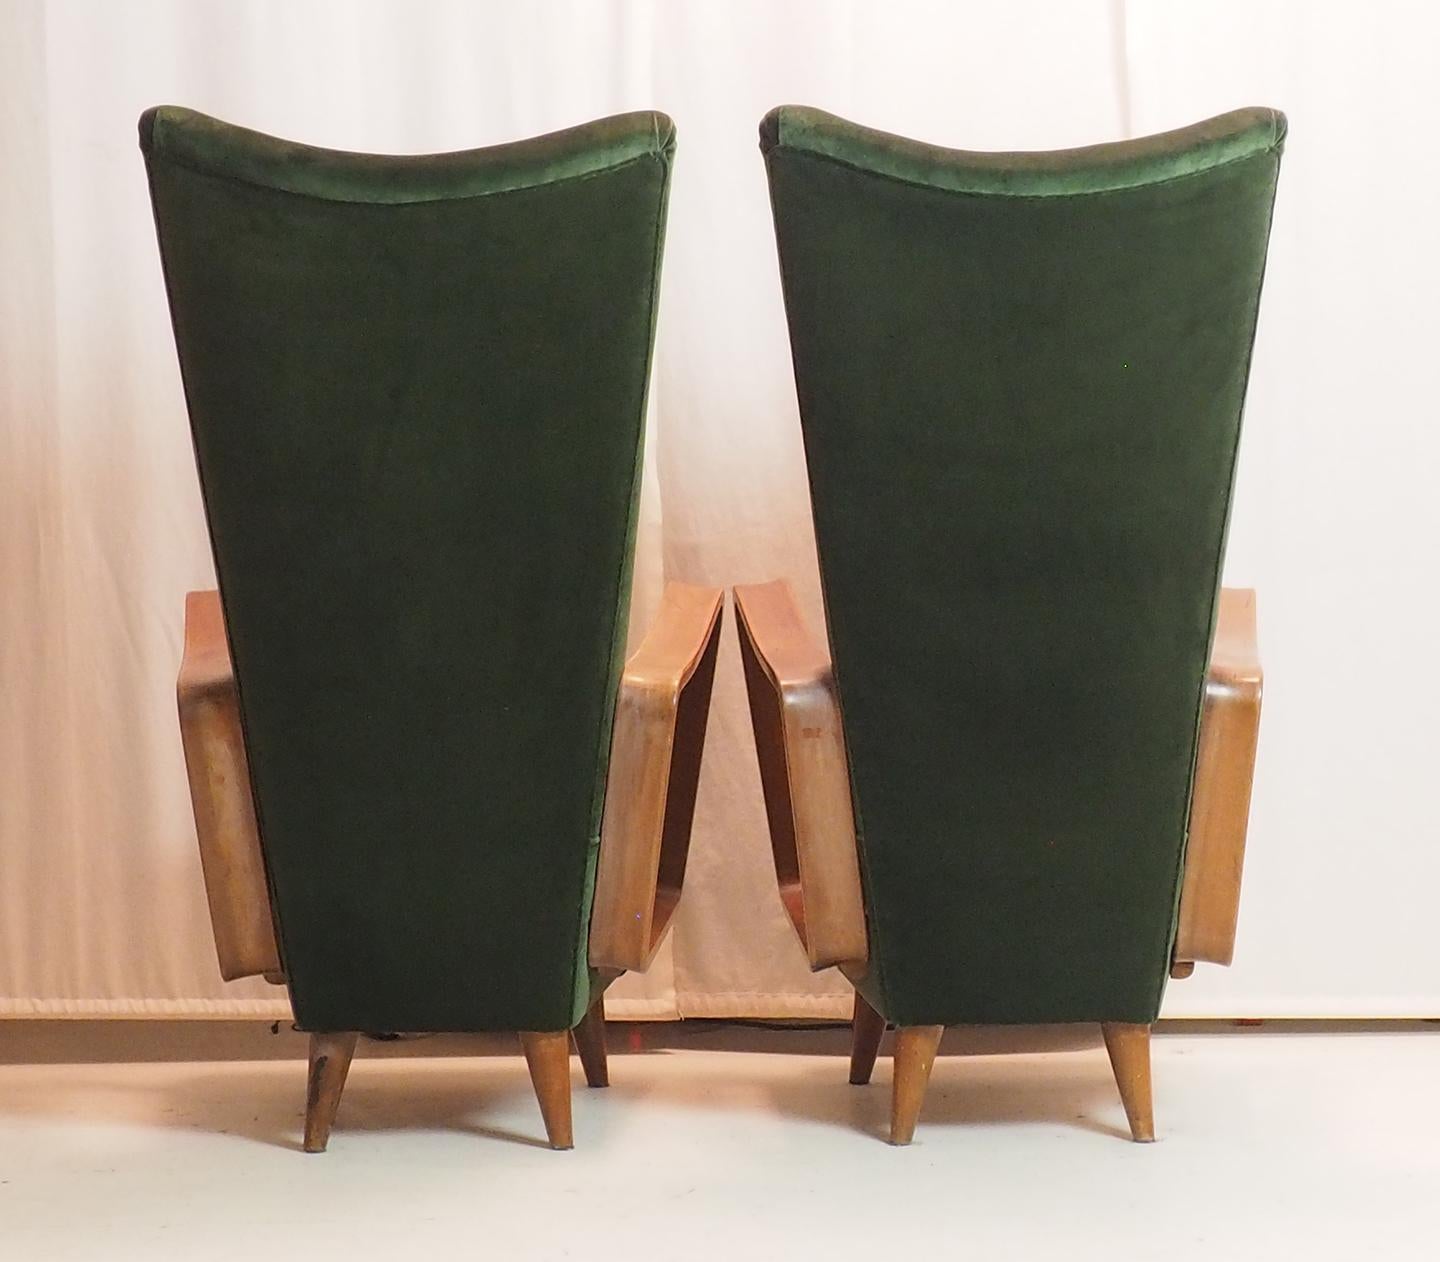 Midcentury High Back Italian Green Armchairs by Pietro Lingeri, Italy 1950s For Sale 8